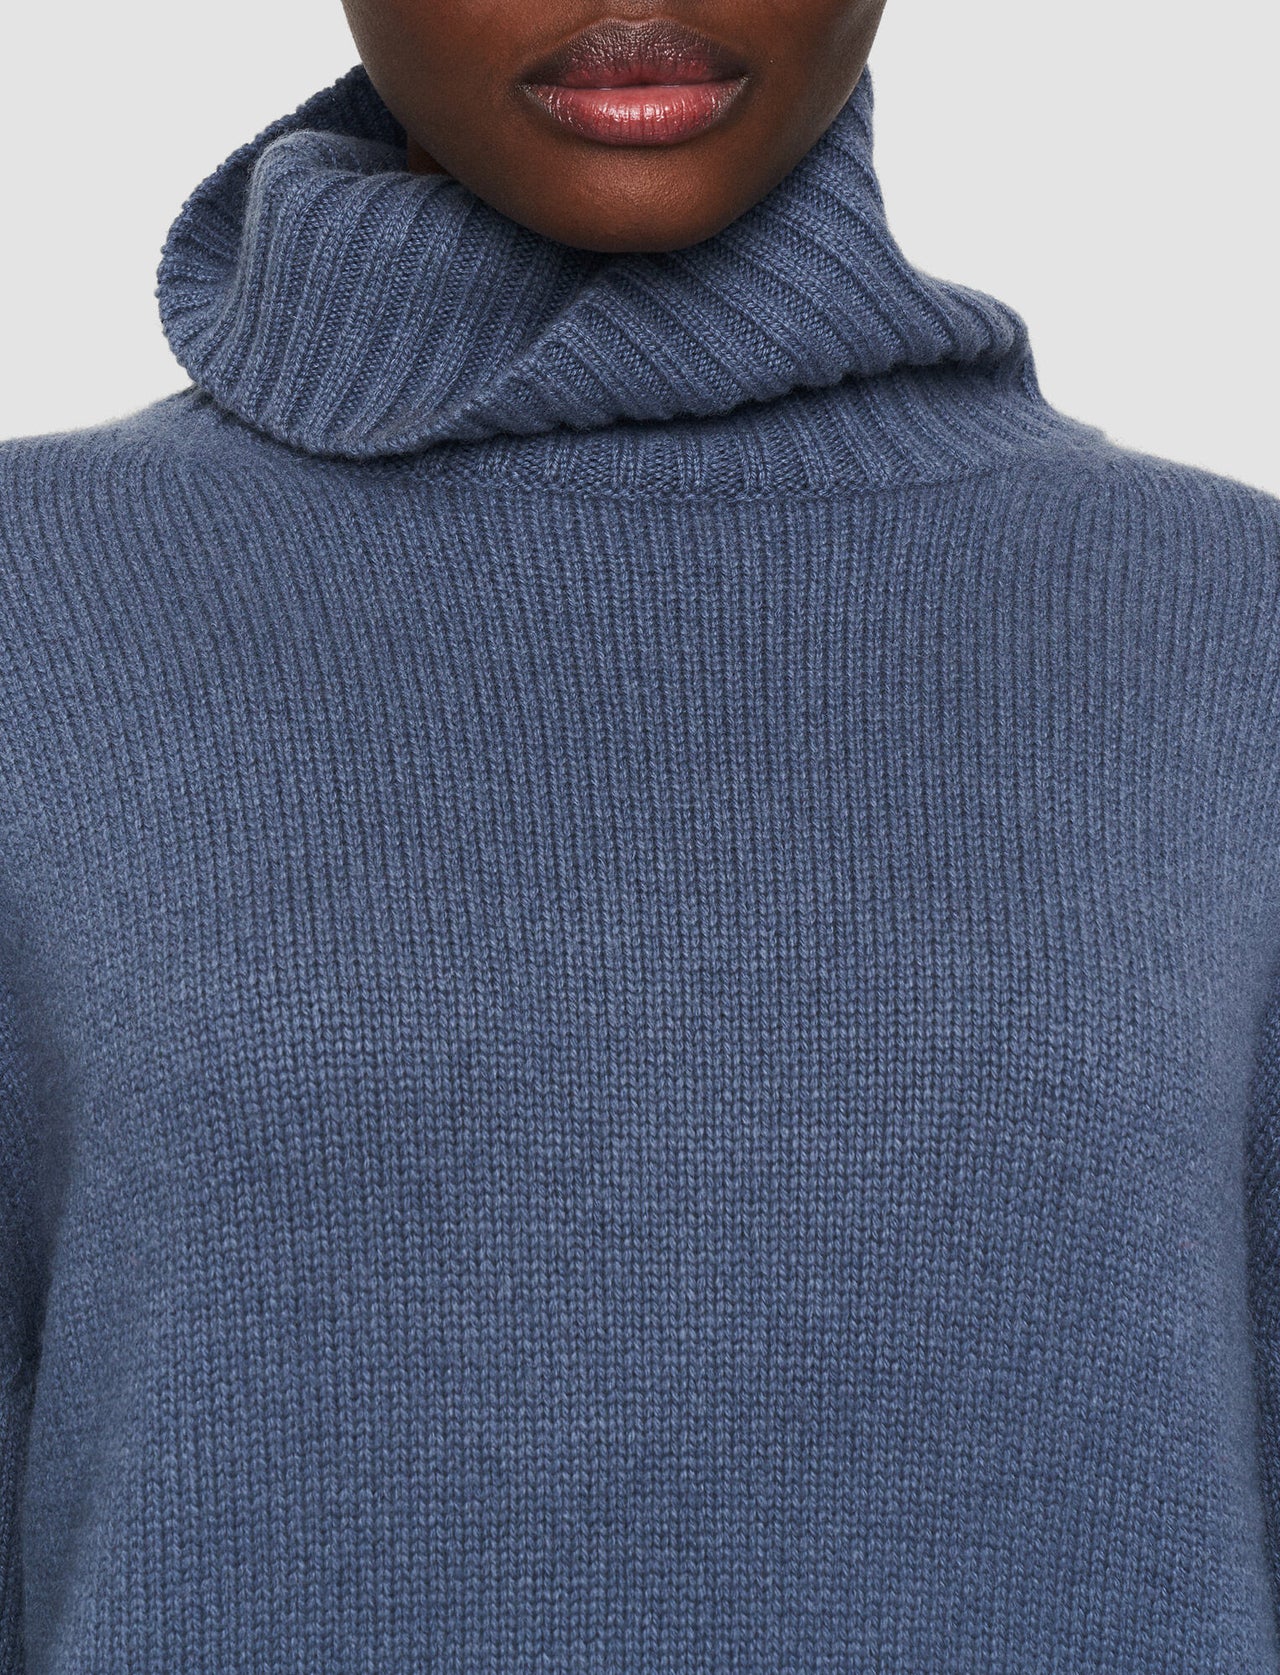 High Neck Ls-Luxe Cashmere-Sweater-Joseph-Debs Boutique